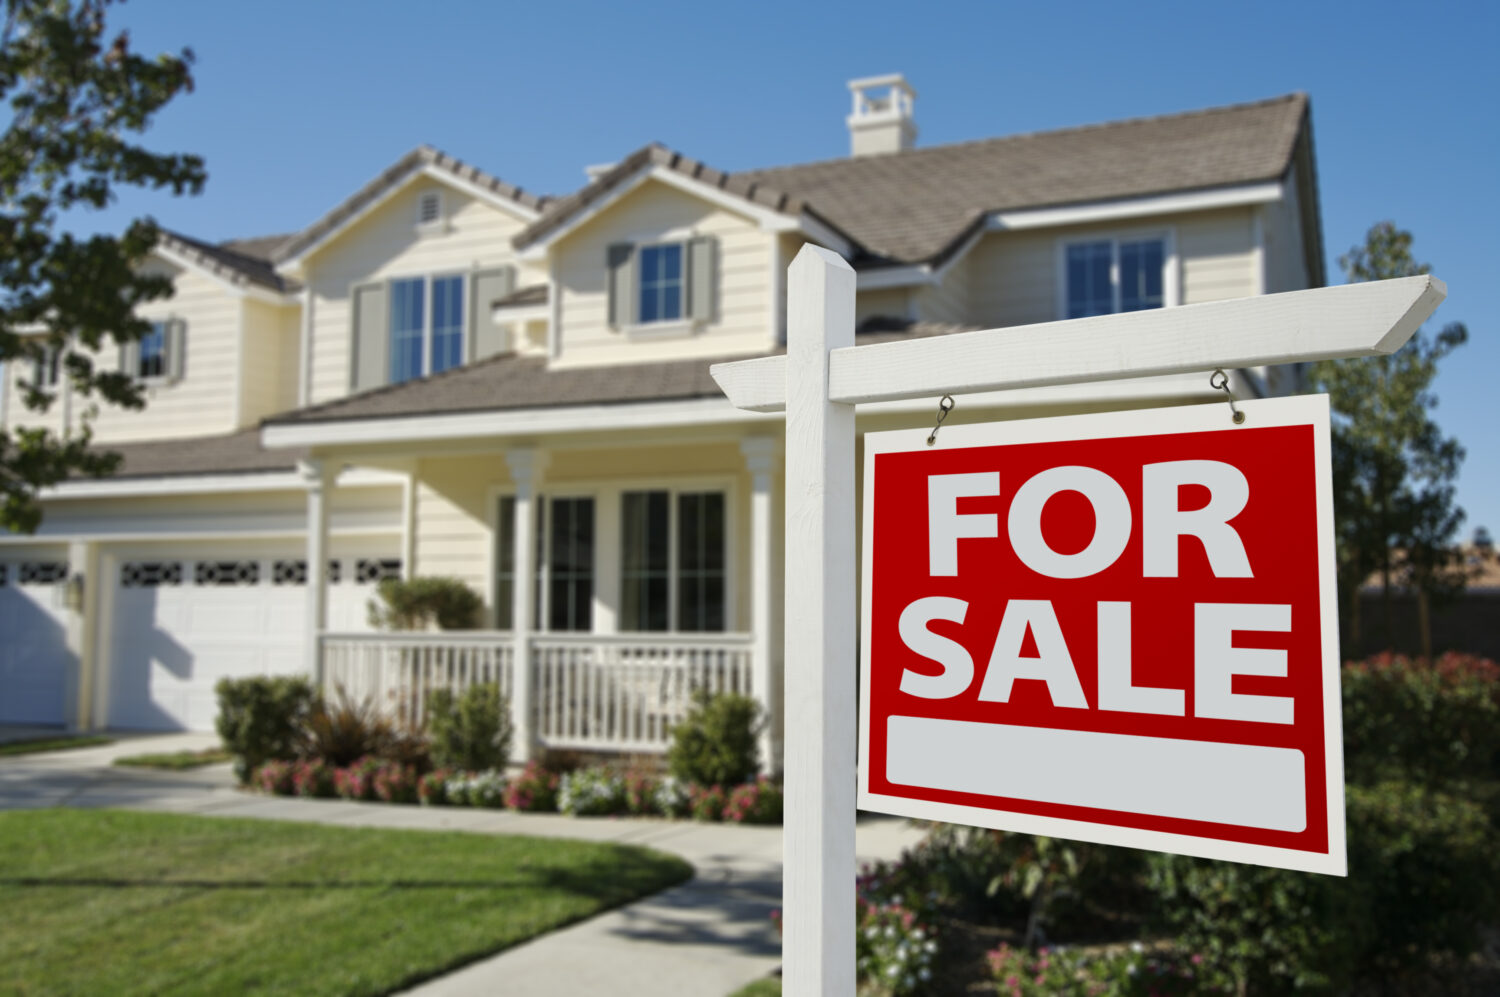 Top 5 tips for selling your house quickly and for more money